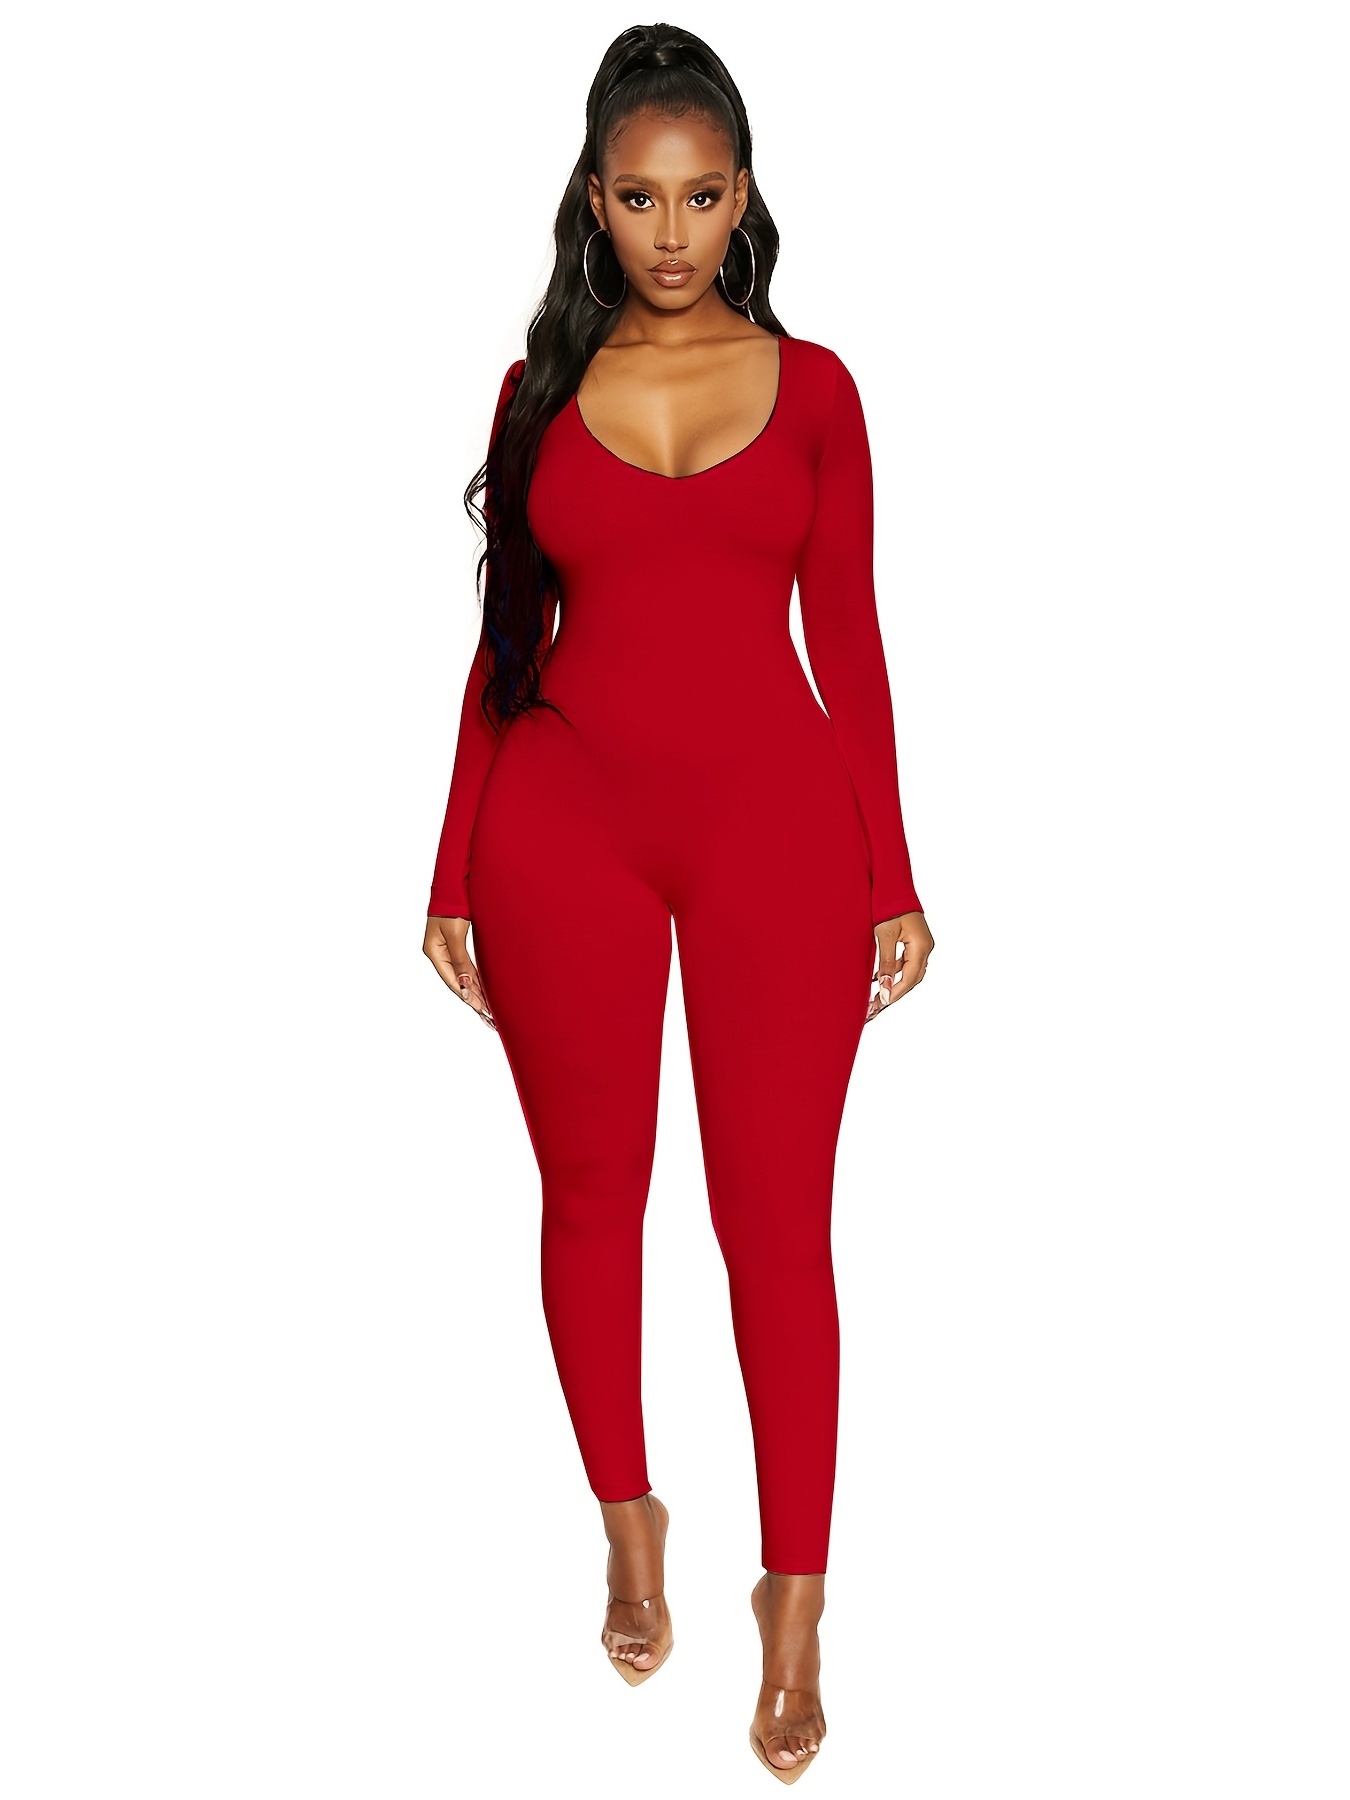 JNGSA Women's Shapewear Bodysuits, Bodysuit for Tall Women Long Sleeved  Solid Color Fashion Tight Fitting Cutout Jumpsuit Clearance 